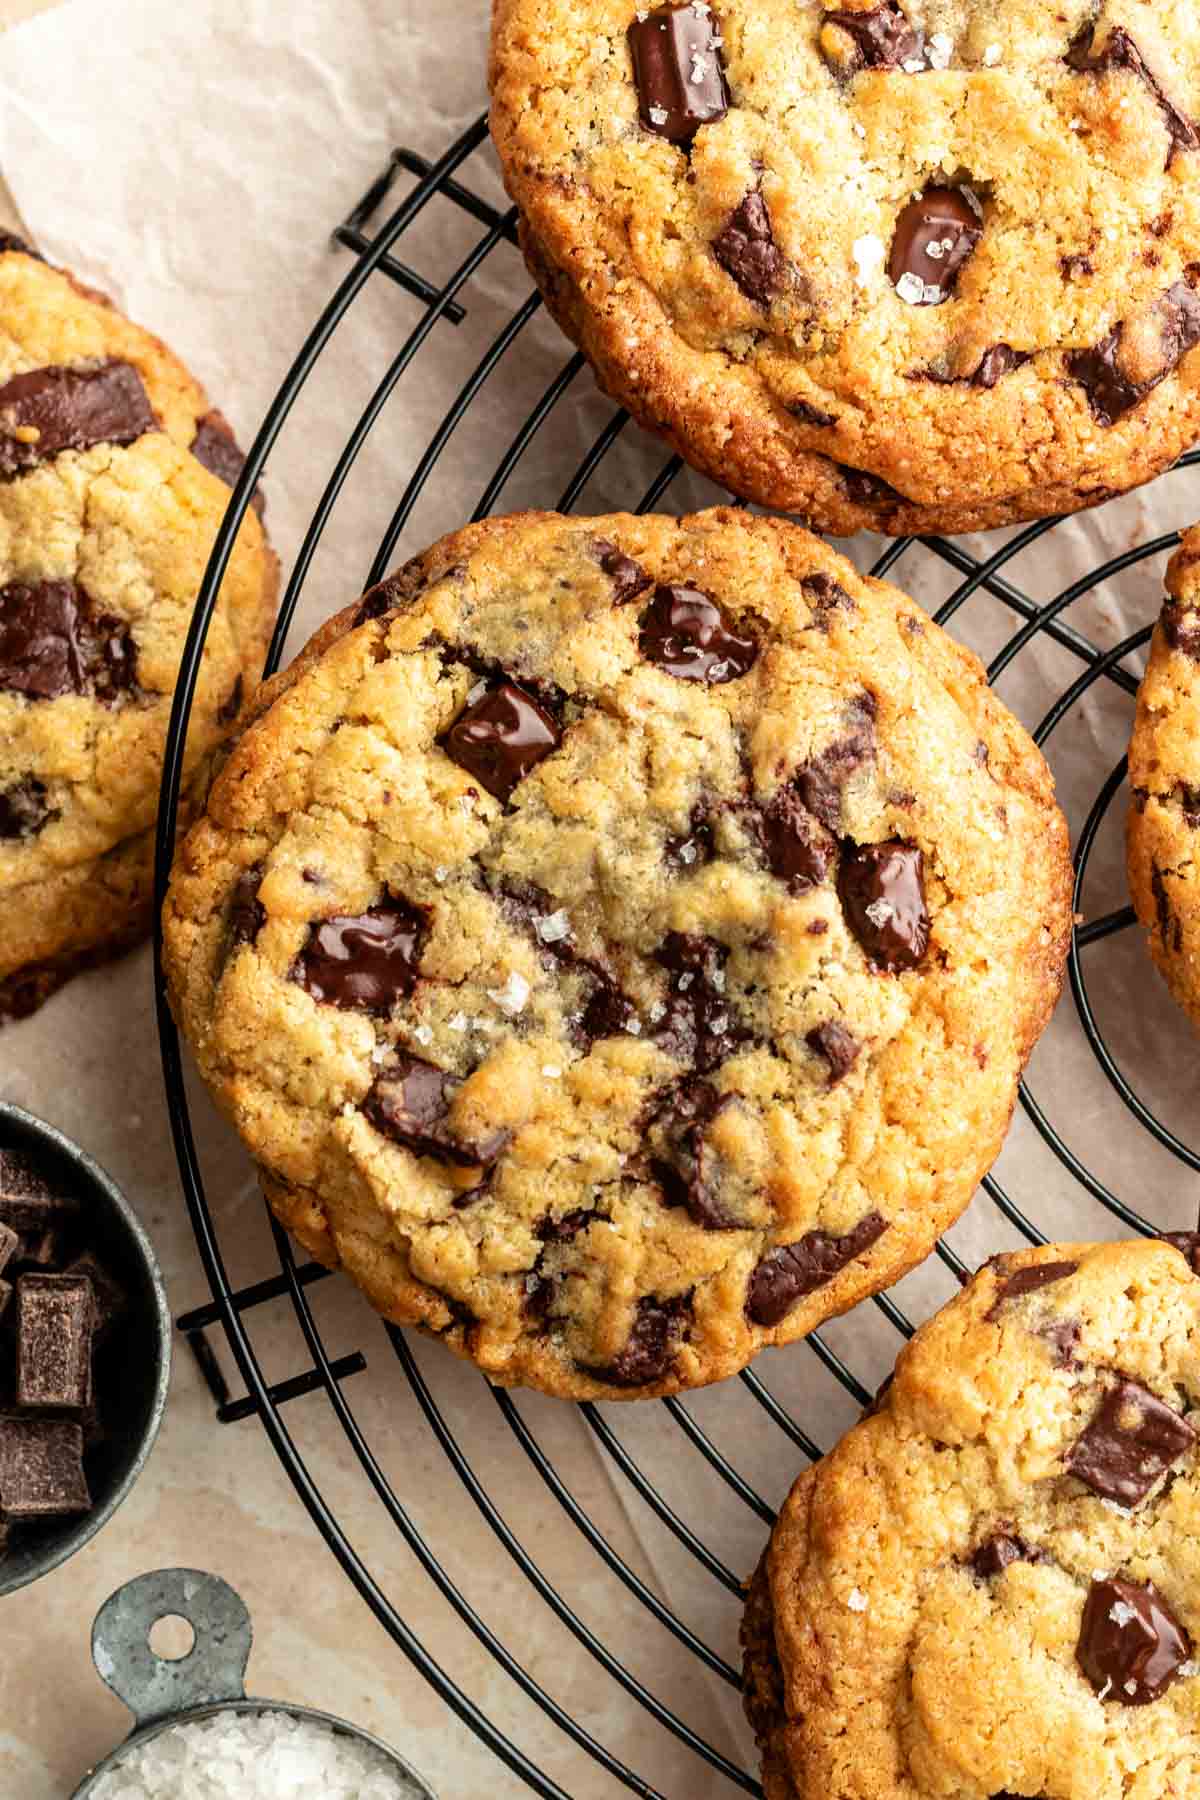 Top of bakery style chocolate chip cookies.